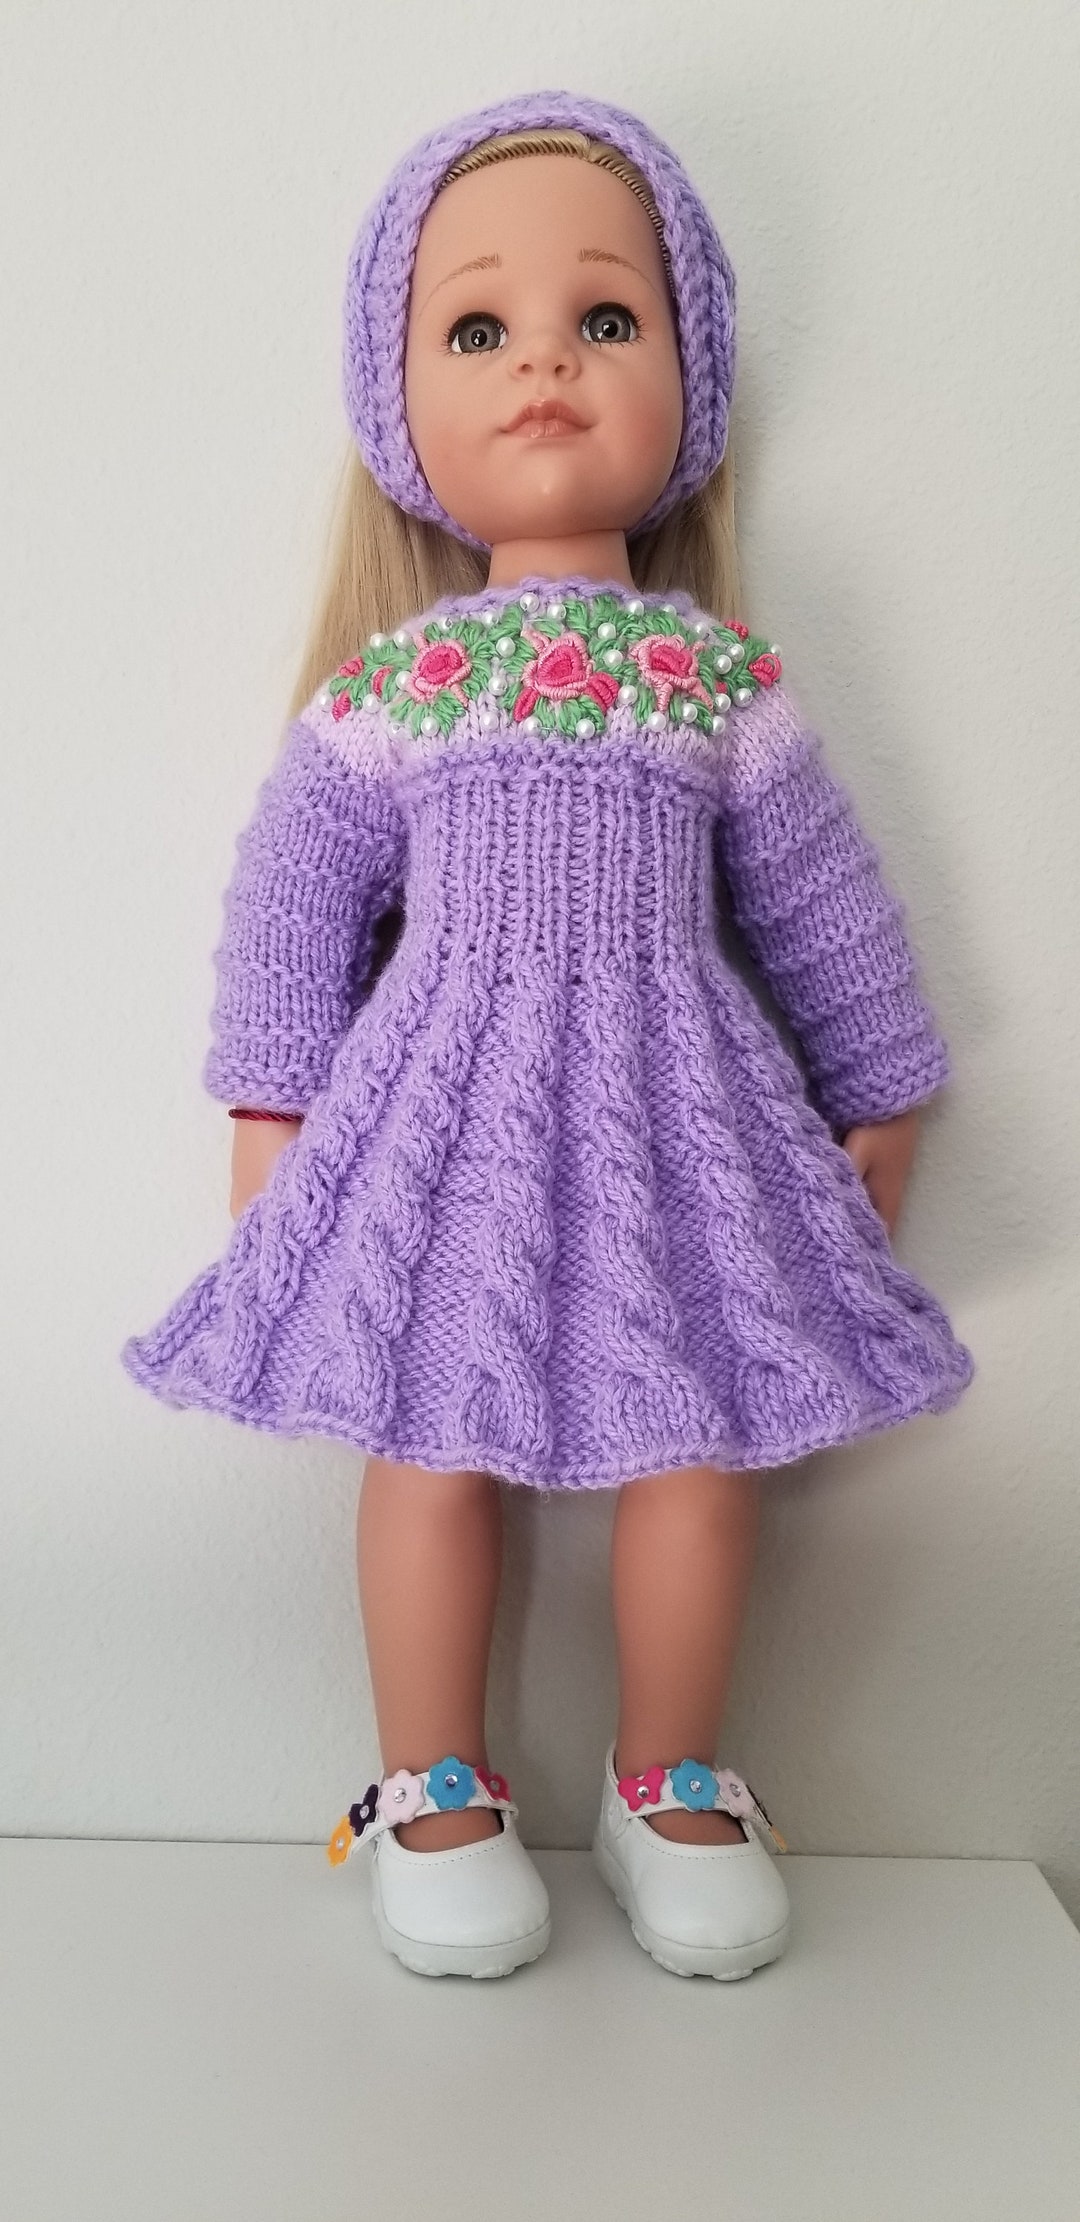 18 Inches 19 Inches Doll Clothes suitable for American Girl - Etsy